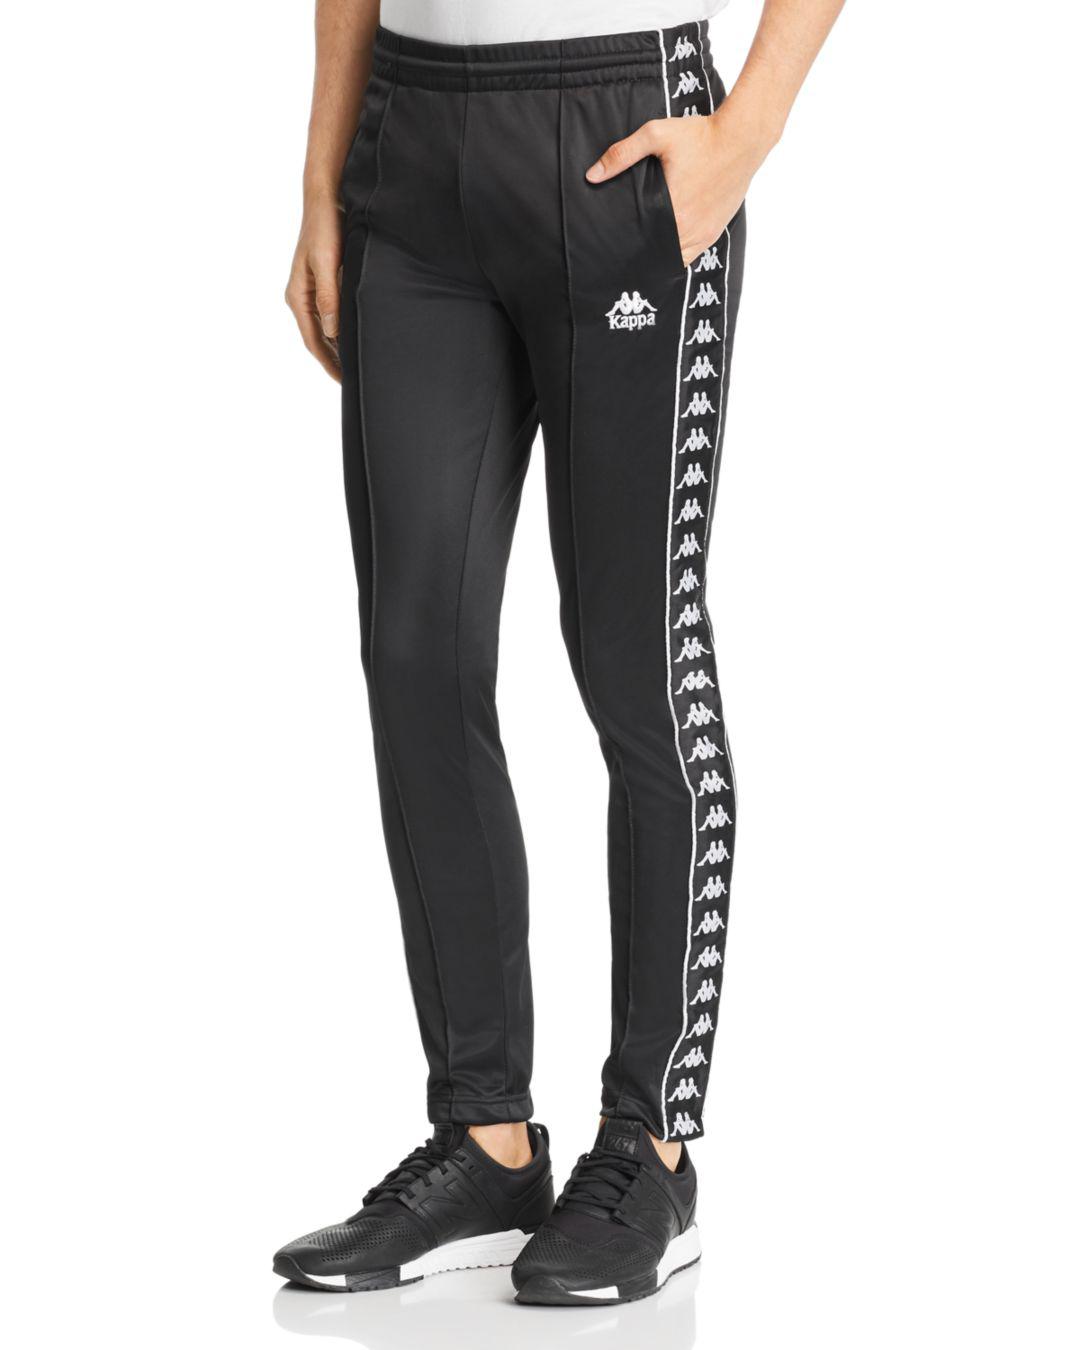 Kappa Authentic Fairfax Sweatpants in Black for Men - Lyst